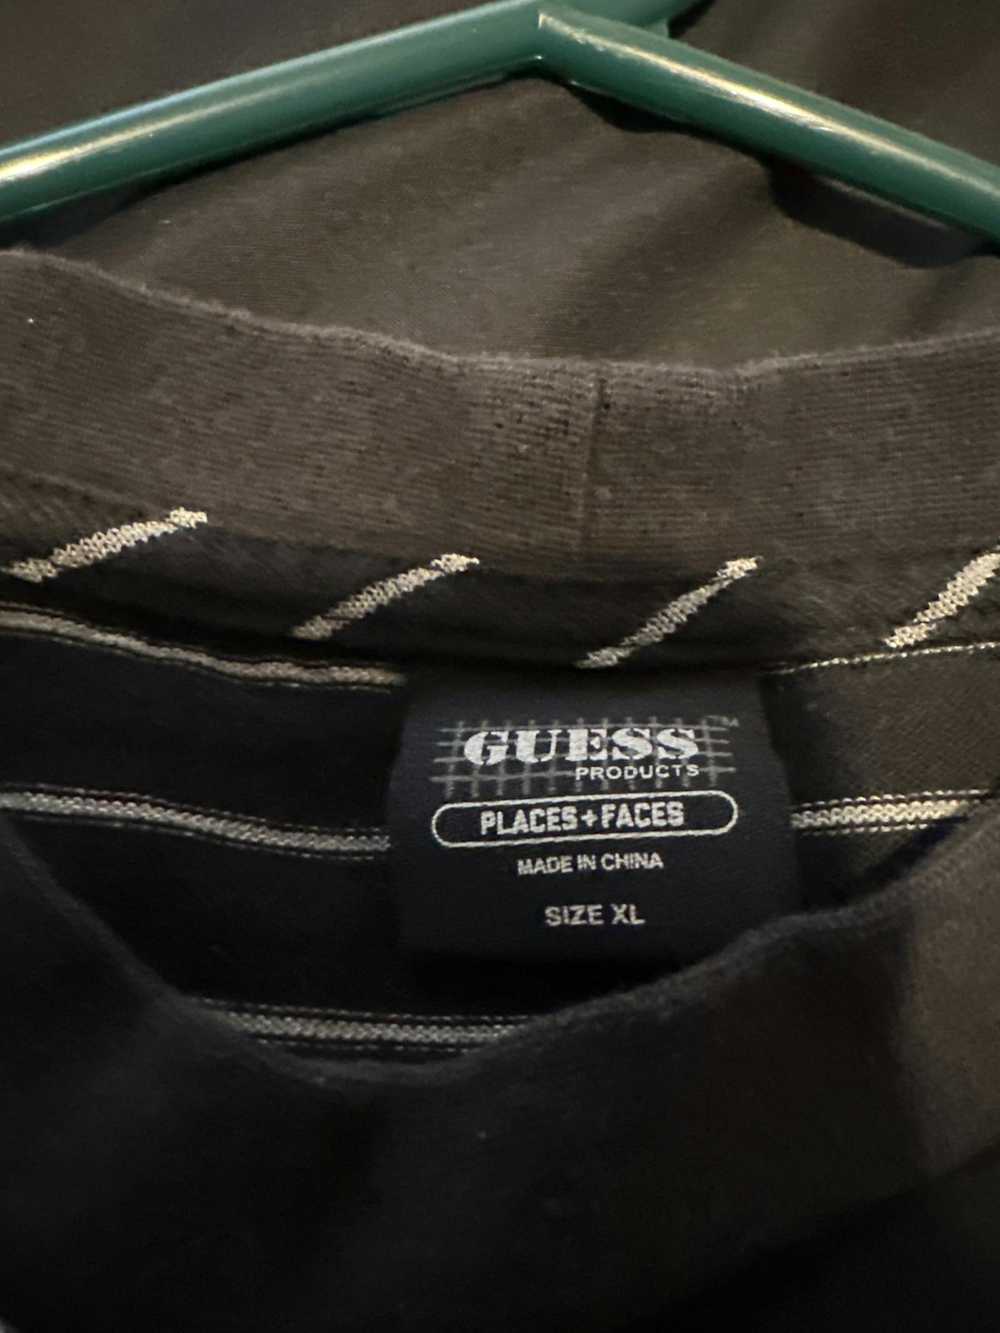 Guess Guess jeans reflective shirt - image 4